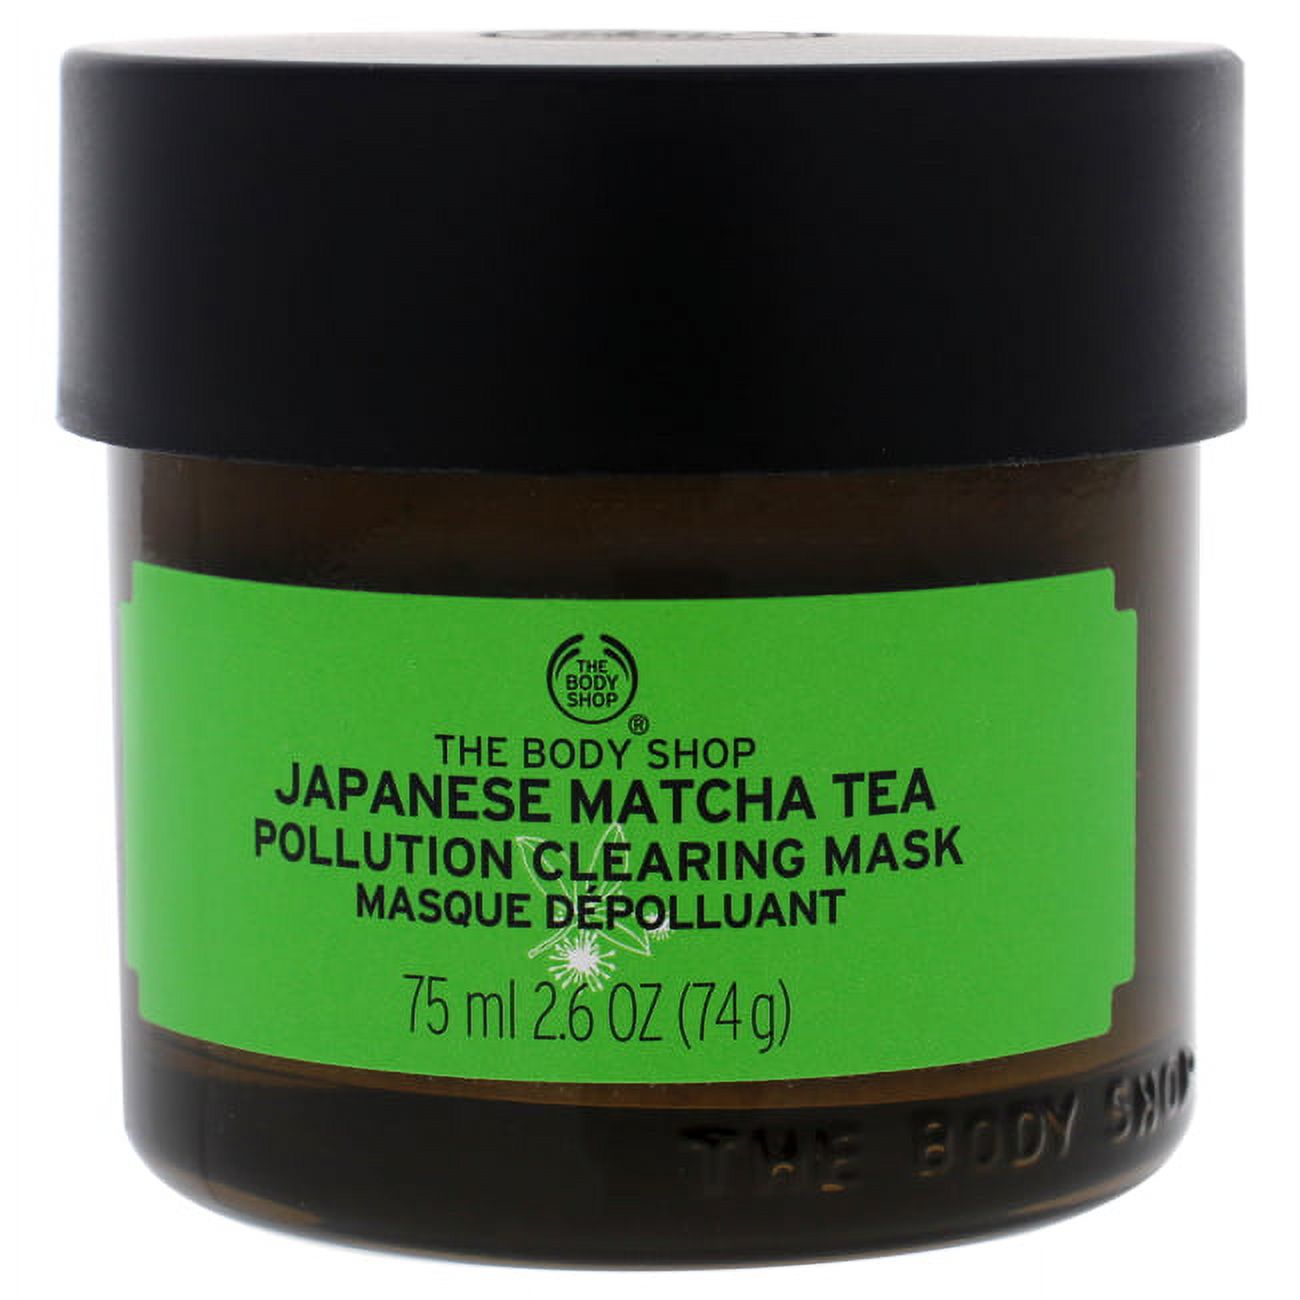 Japanese Matcha Tea Pollution Clearing Mask by The Body Shop for Unisex - 2.6 oz Mask - image 1 of 2